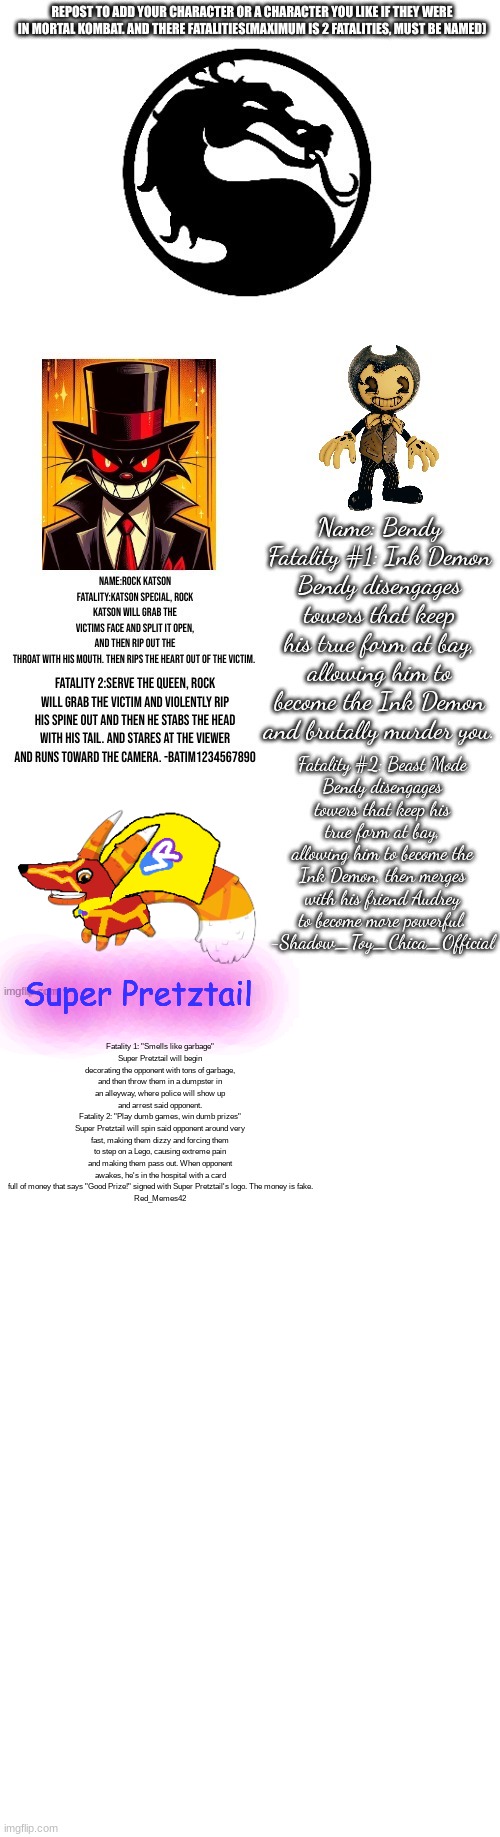 rather childish, but why not | Fatality 1: "Smells like garbage"
Super Pretztail will begin decorating the opponent with tons of garbage, and then throw them in a dumpster in an alleyway, where police will show up and arrest said opponent.
Fatality 2: "Play dumb games, win dumb prizes"
Super Pretztail will spin said opponent around very fast, making them dizzy and forcing them to step on a Lego, causing extreme pain and making them pass out. When opponent awakes, he's in the hospital with a card full of money that says "Good Prize!" signed with Super Pretztail's logo. The money is fake.
Red_Memes42; Super Pretztail | image tagged in blank white template | made w/ Imgflip meme maker